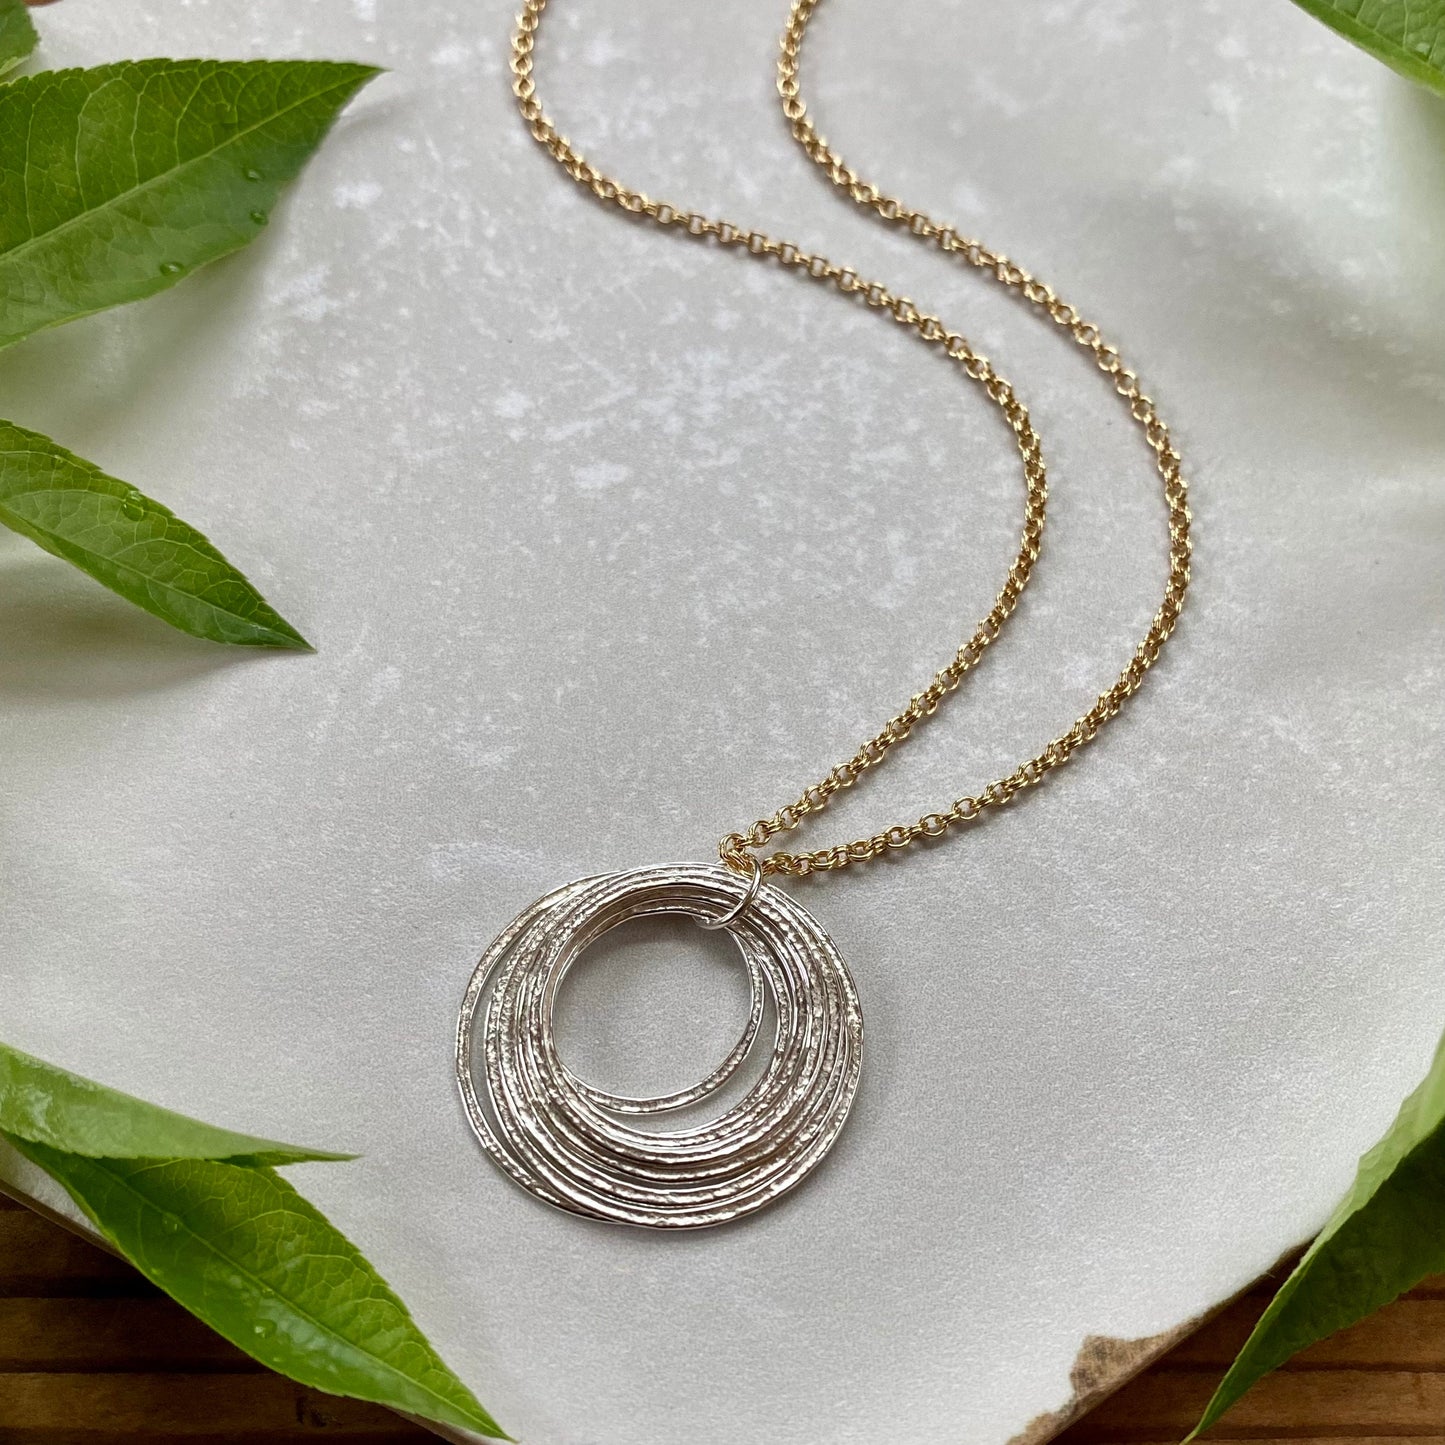 9 Circle 90th Minimalist Mixed Metal Milestone Birthday Necklace, Nine Rings for 9 Decades Handcrafted Perfectly Imperfect 9 Circle Pendant